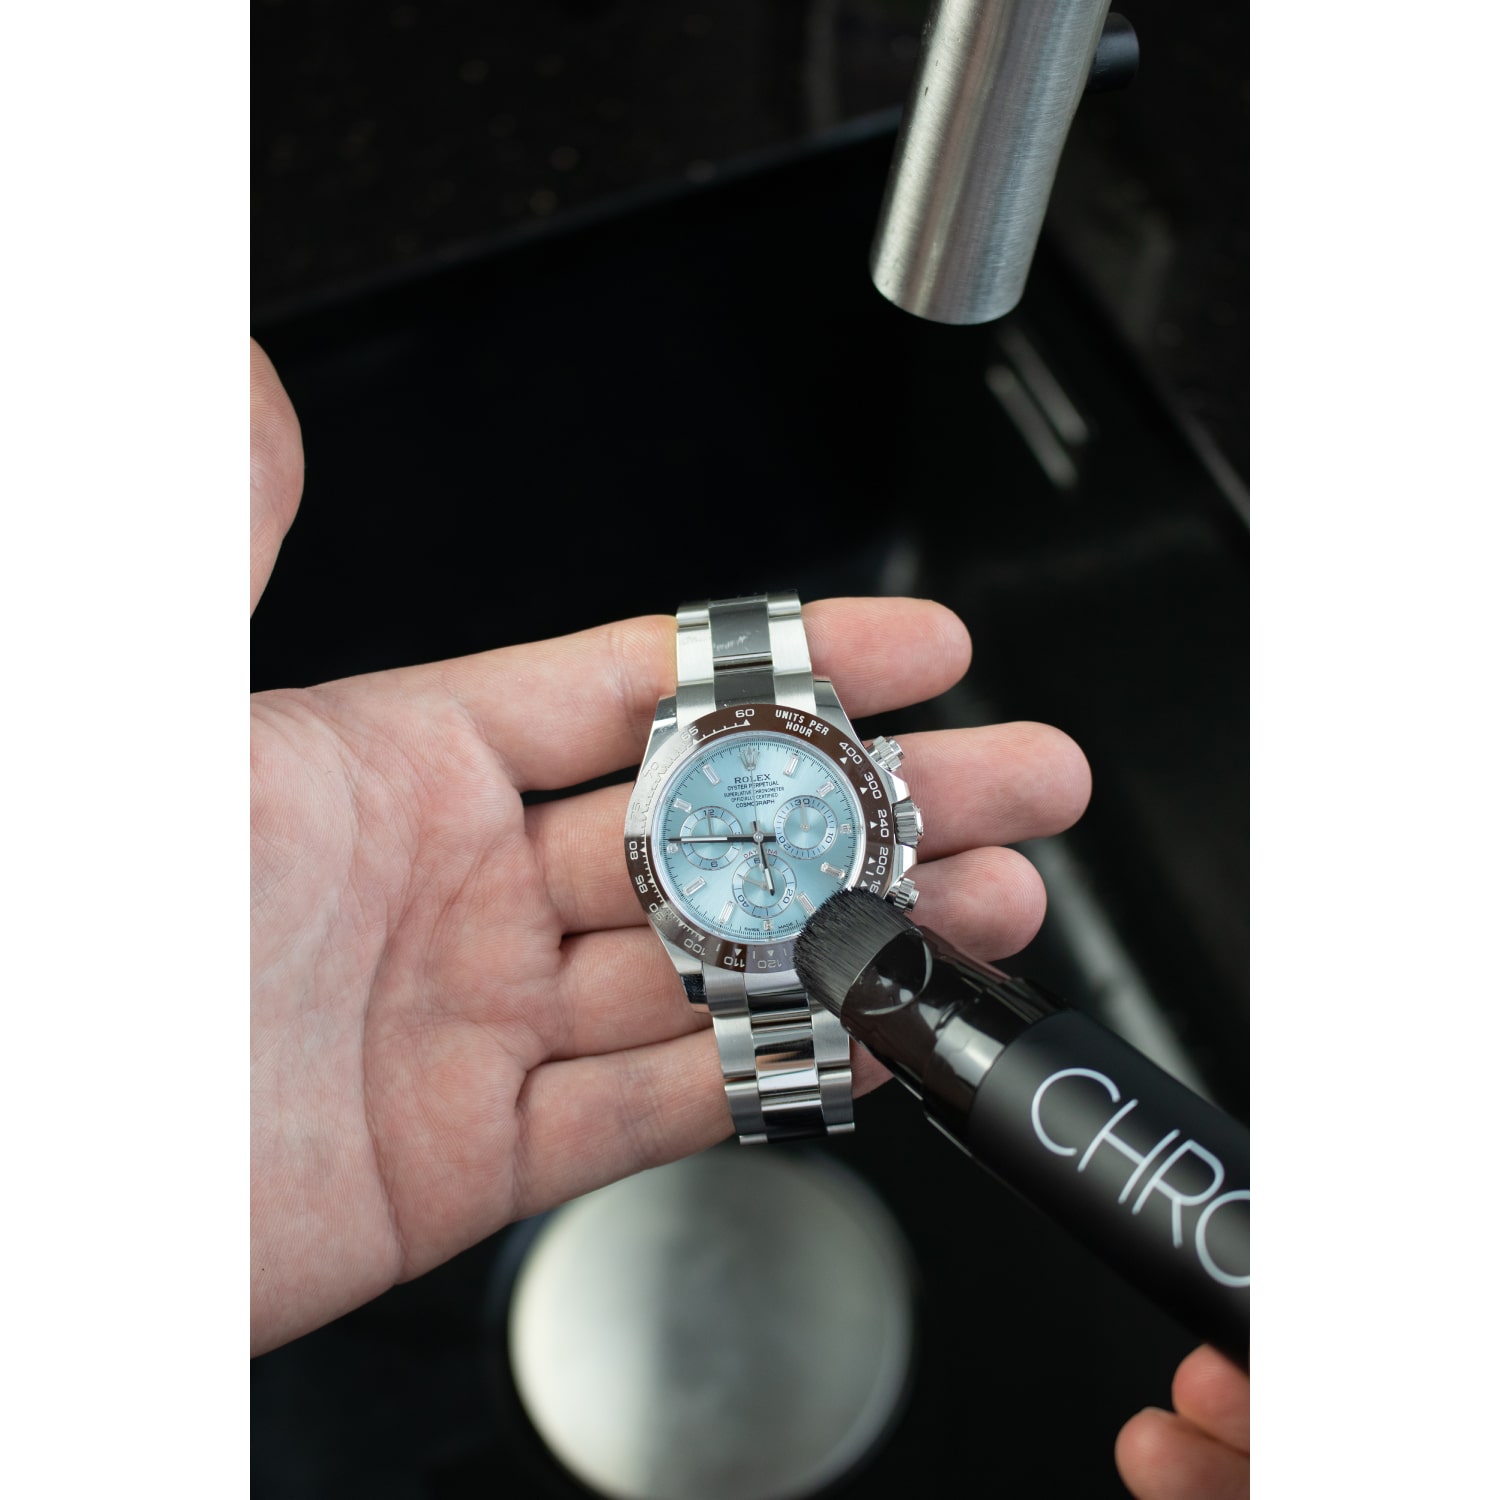 CHRONOPEN - THE WATCH CLEANER at Selva Online